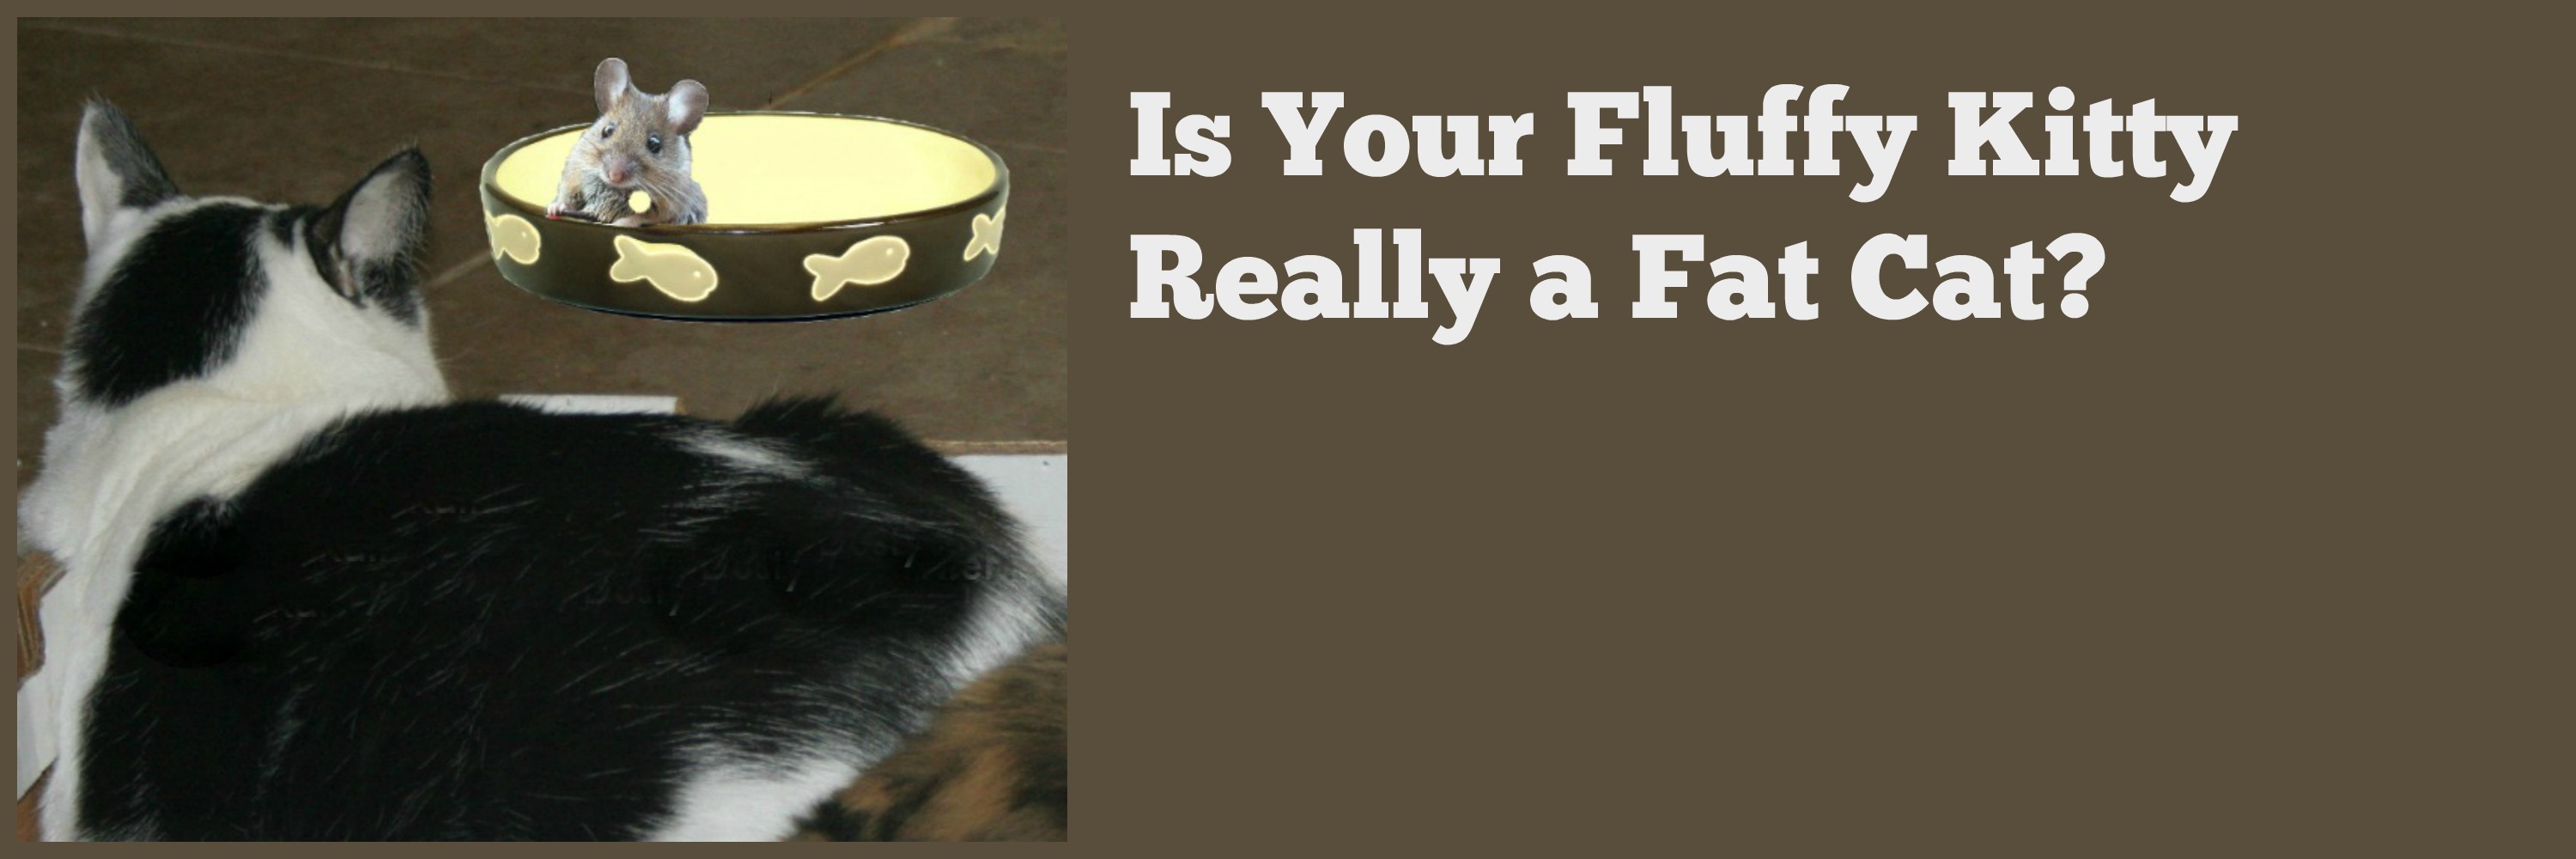 Is Your Fluffy Kitty Really a Fat Cat?